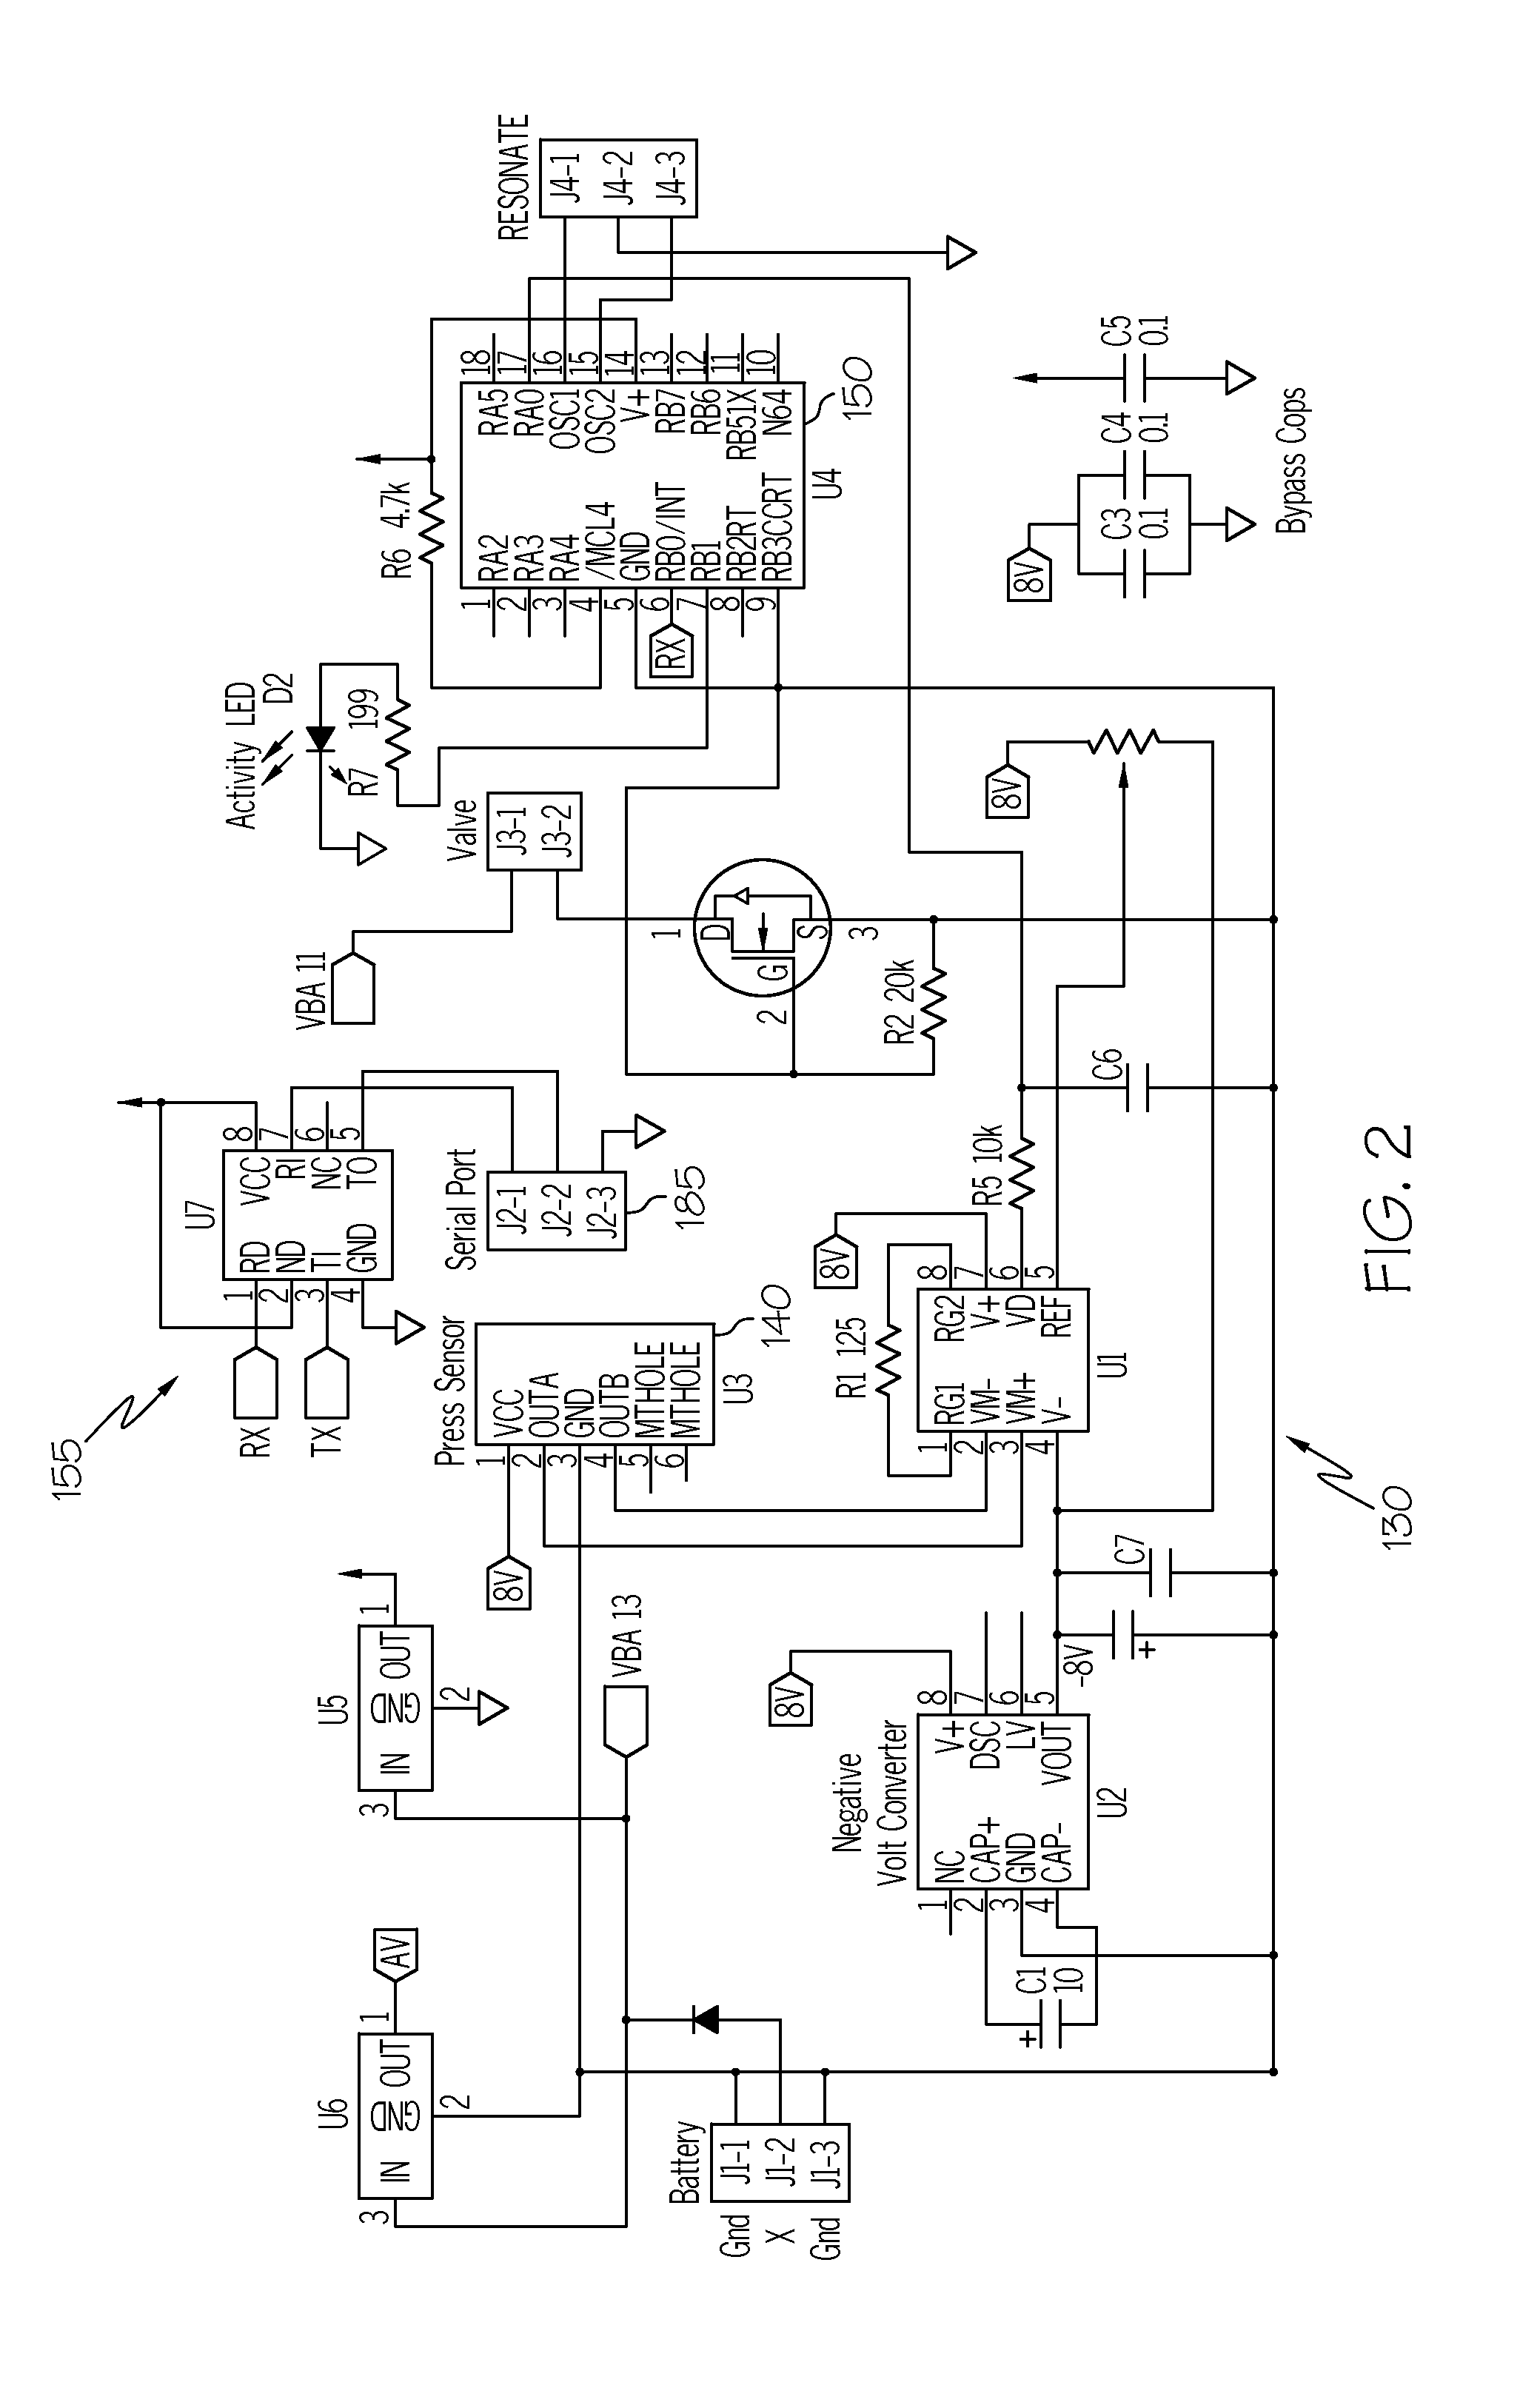 Automated fluid delivery system and method